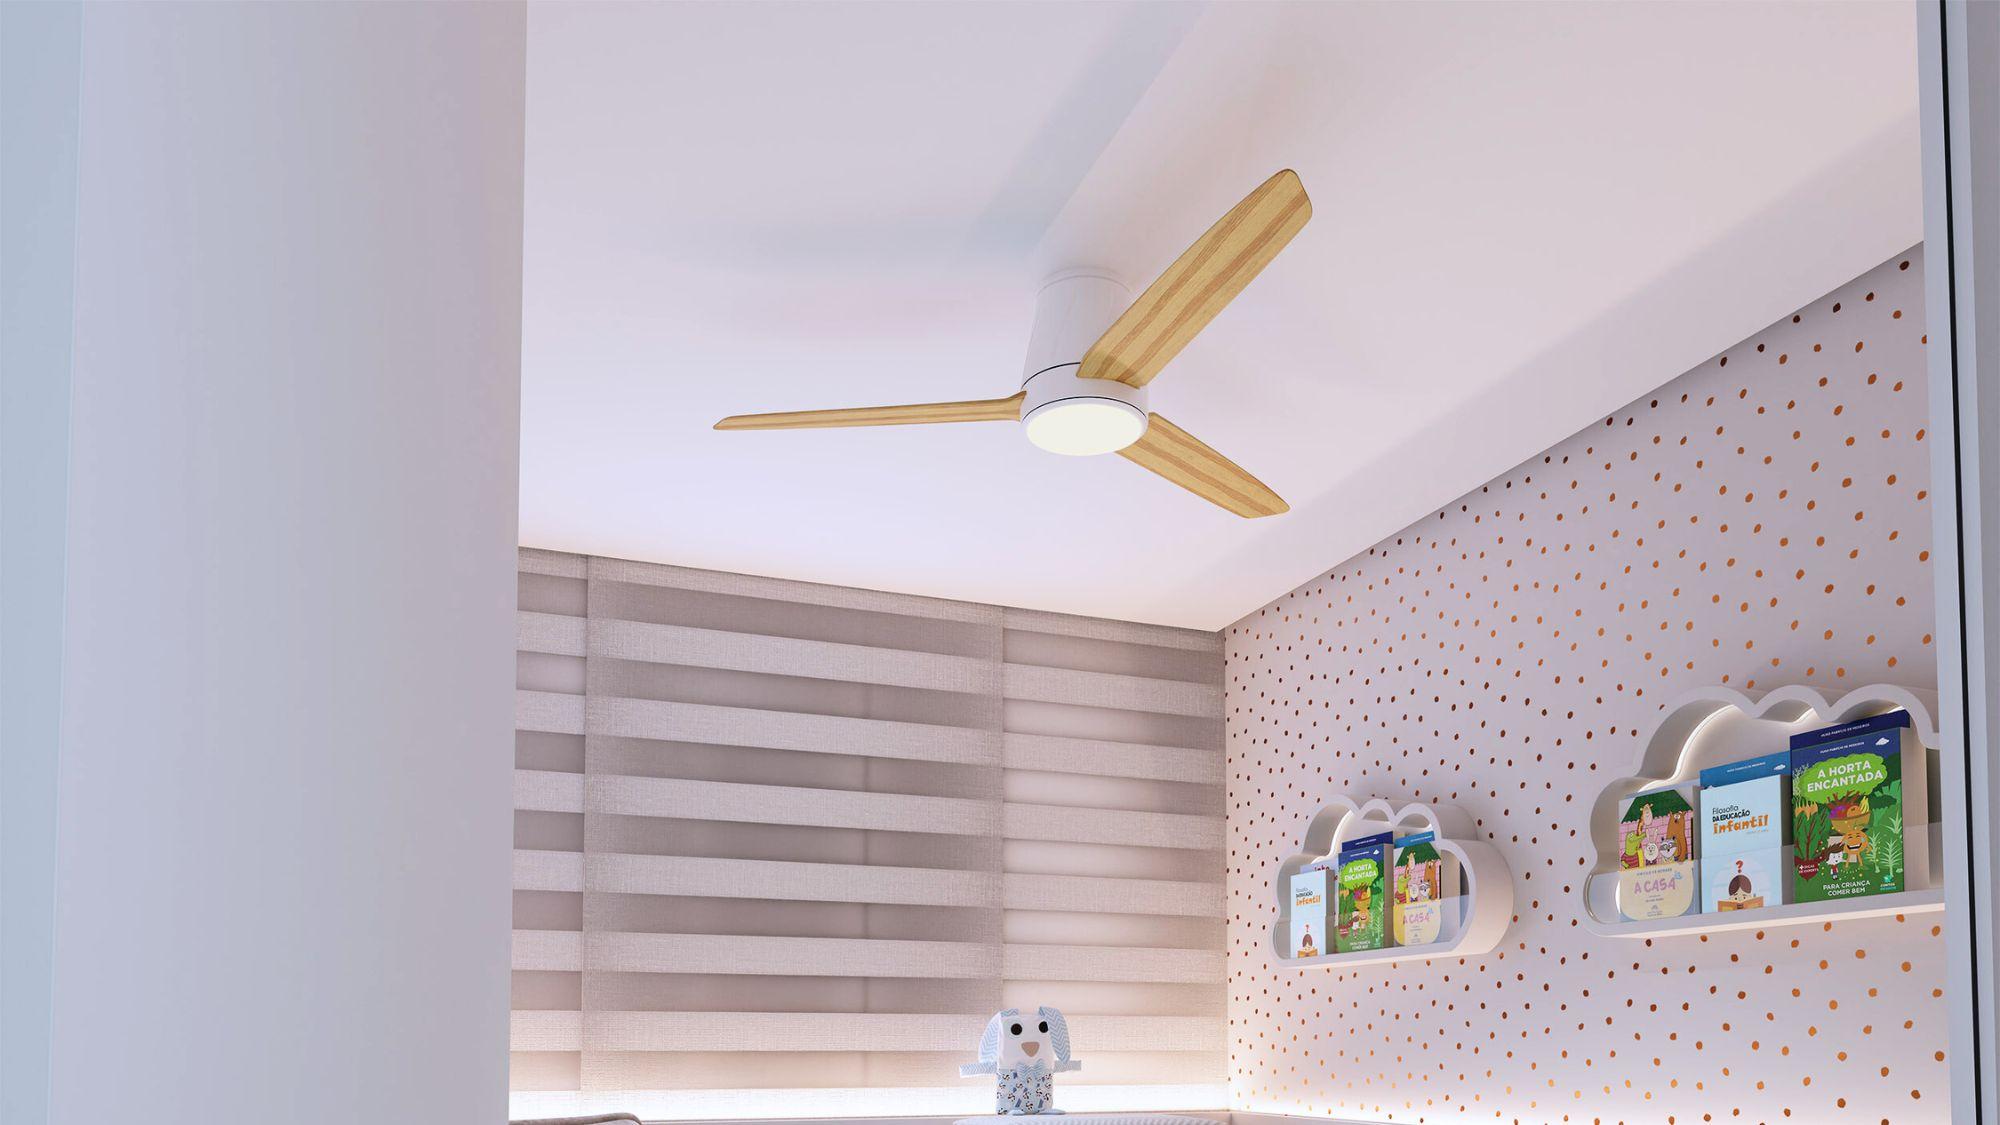 white calibo profile hugger three blade ceiling fan with bamboo blades and led light kit